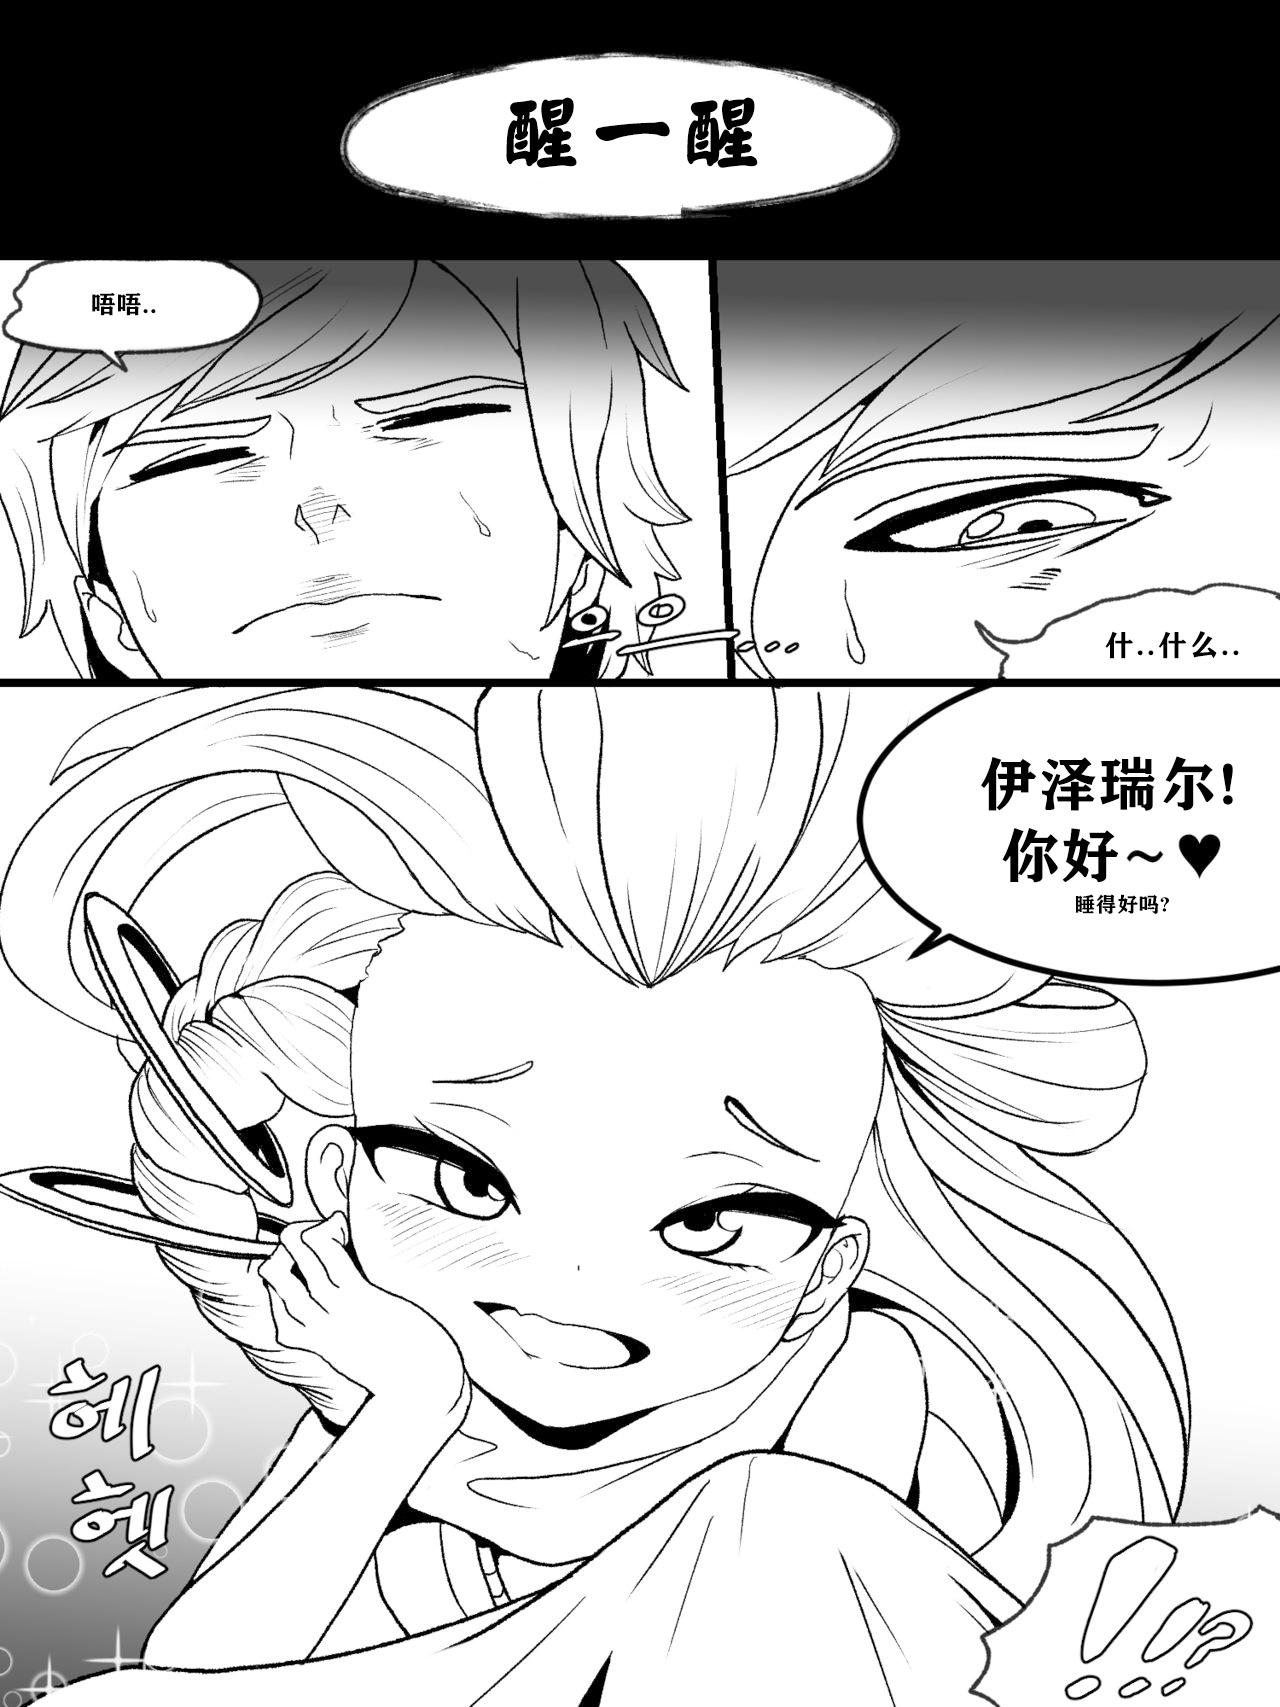 Web The reality in the starlight | 星光中的真实 - League of legends Fuck Com - Page 4